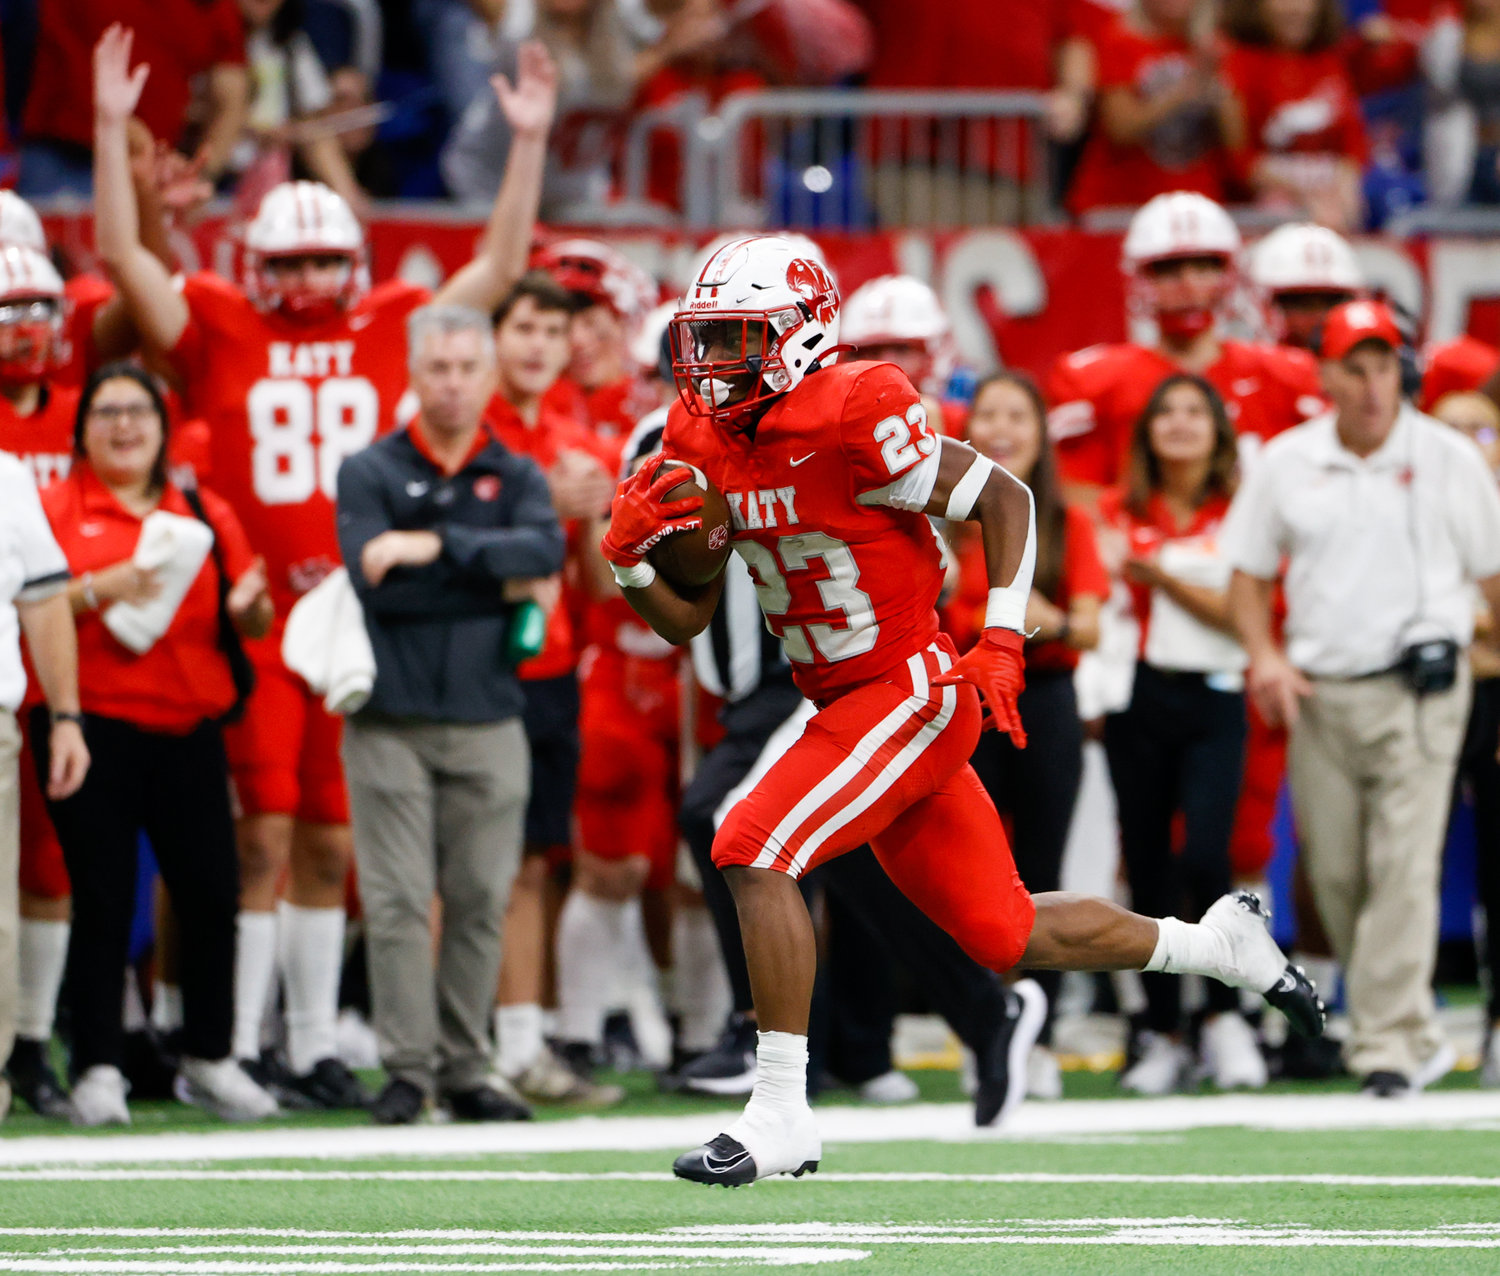 Katy running back Seth Davis (23) scores on a 49-yard touchdown run during the Class 6A-DII state semifinal football game between Katy and Vandegrift on Dec. 10, 2022 in San Antonio.